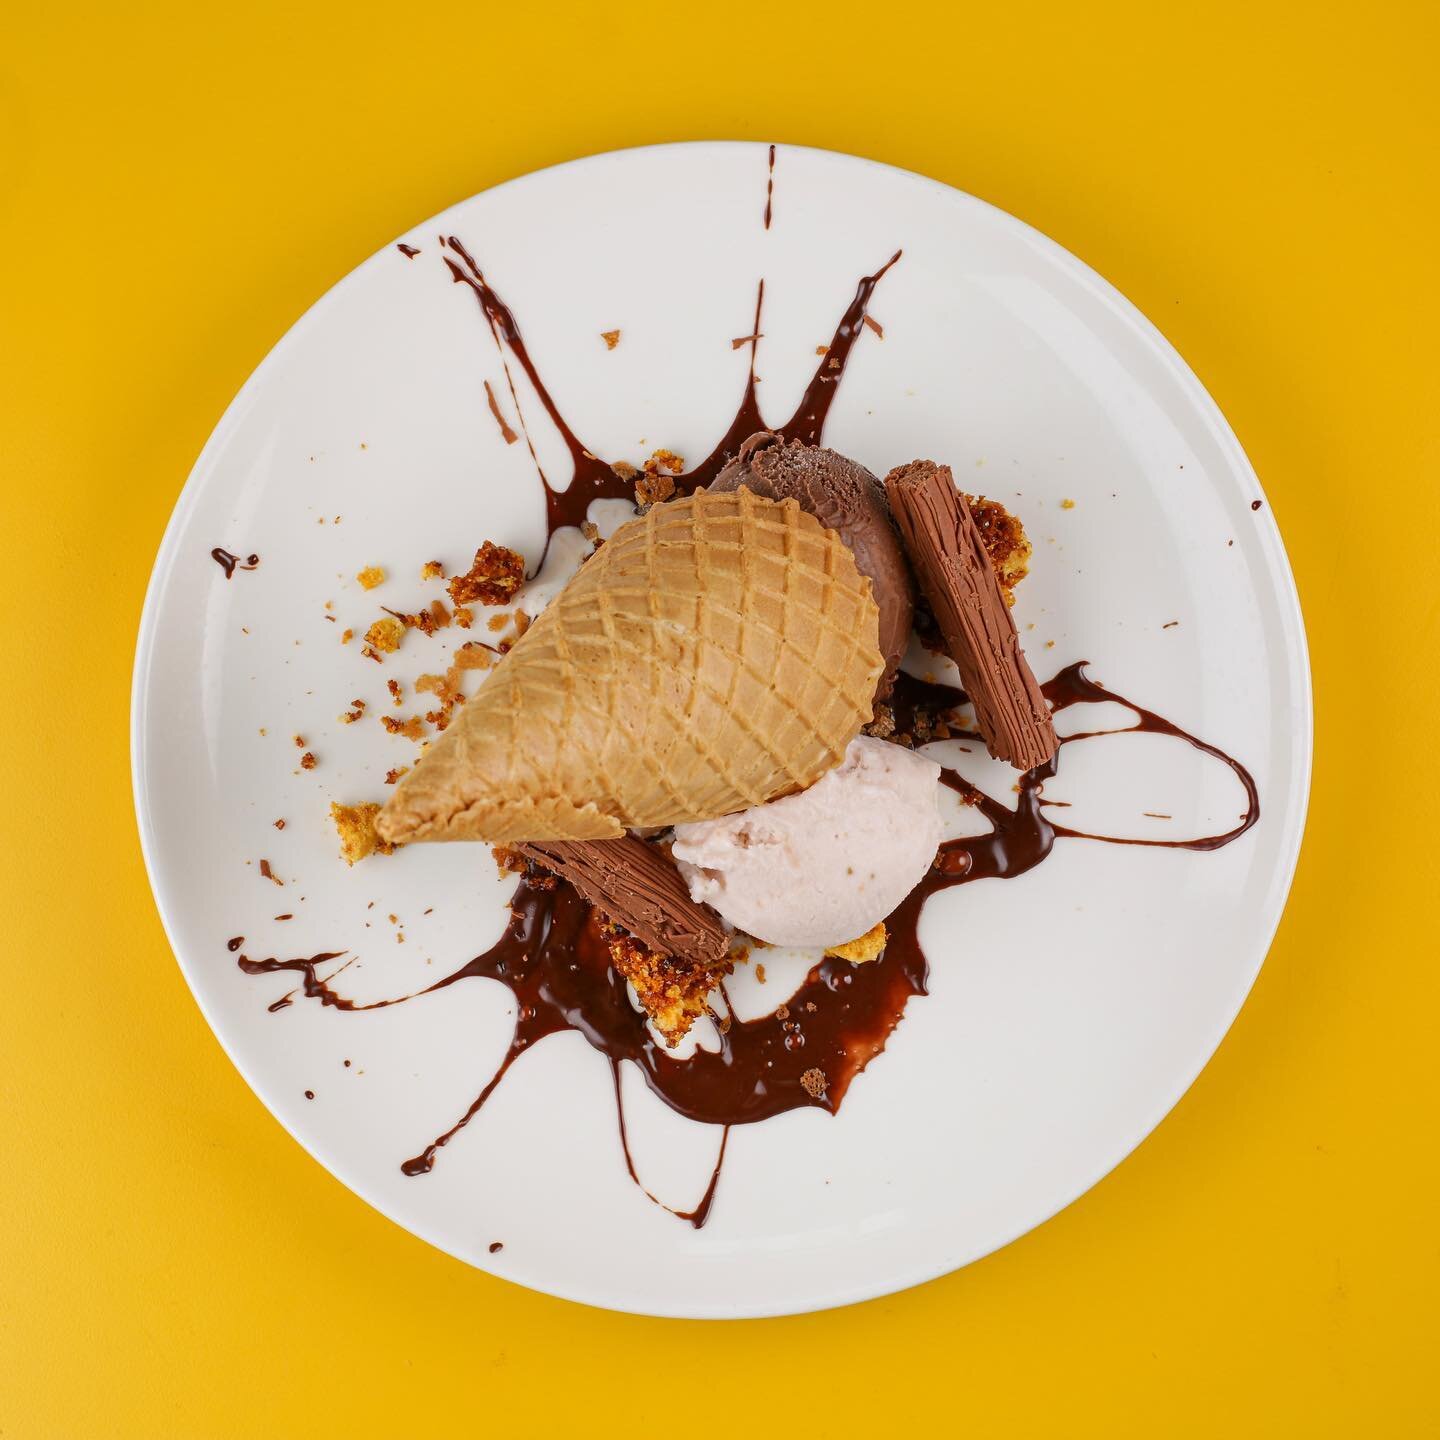 Who dropped the sundae?? 😉🍦 
.
.
.
Have you tried our Dropped @scupgelato with Honeycomb &amp; Chocolate Sauce? A new addition to our &lsquo;Sweets&rsquo; menu. Walk-ins welcome or visit NoName.bar to make a booking!
📸@mrfoambuffalo
#thebarwithnon